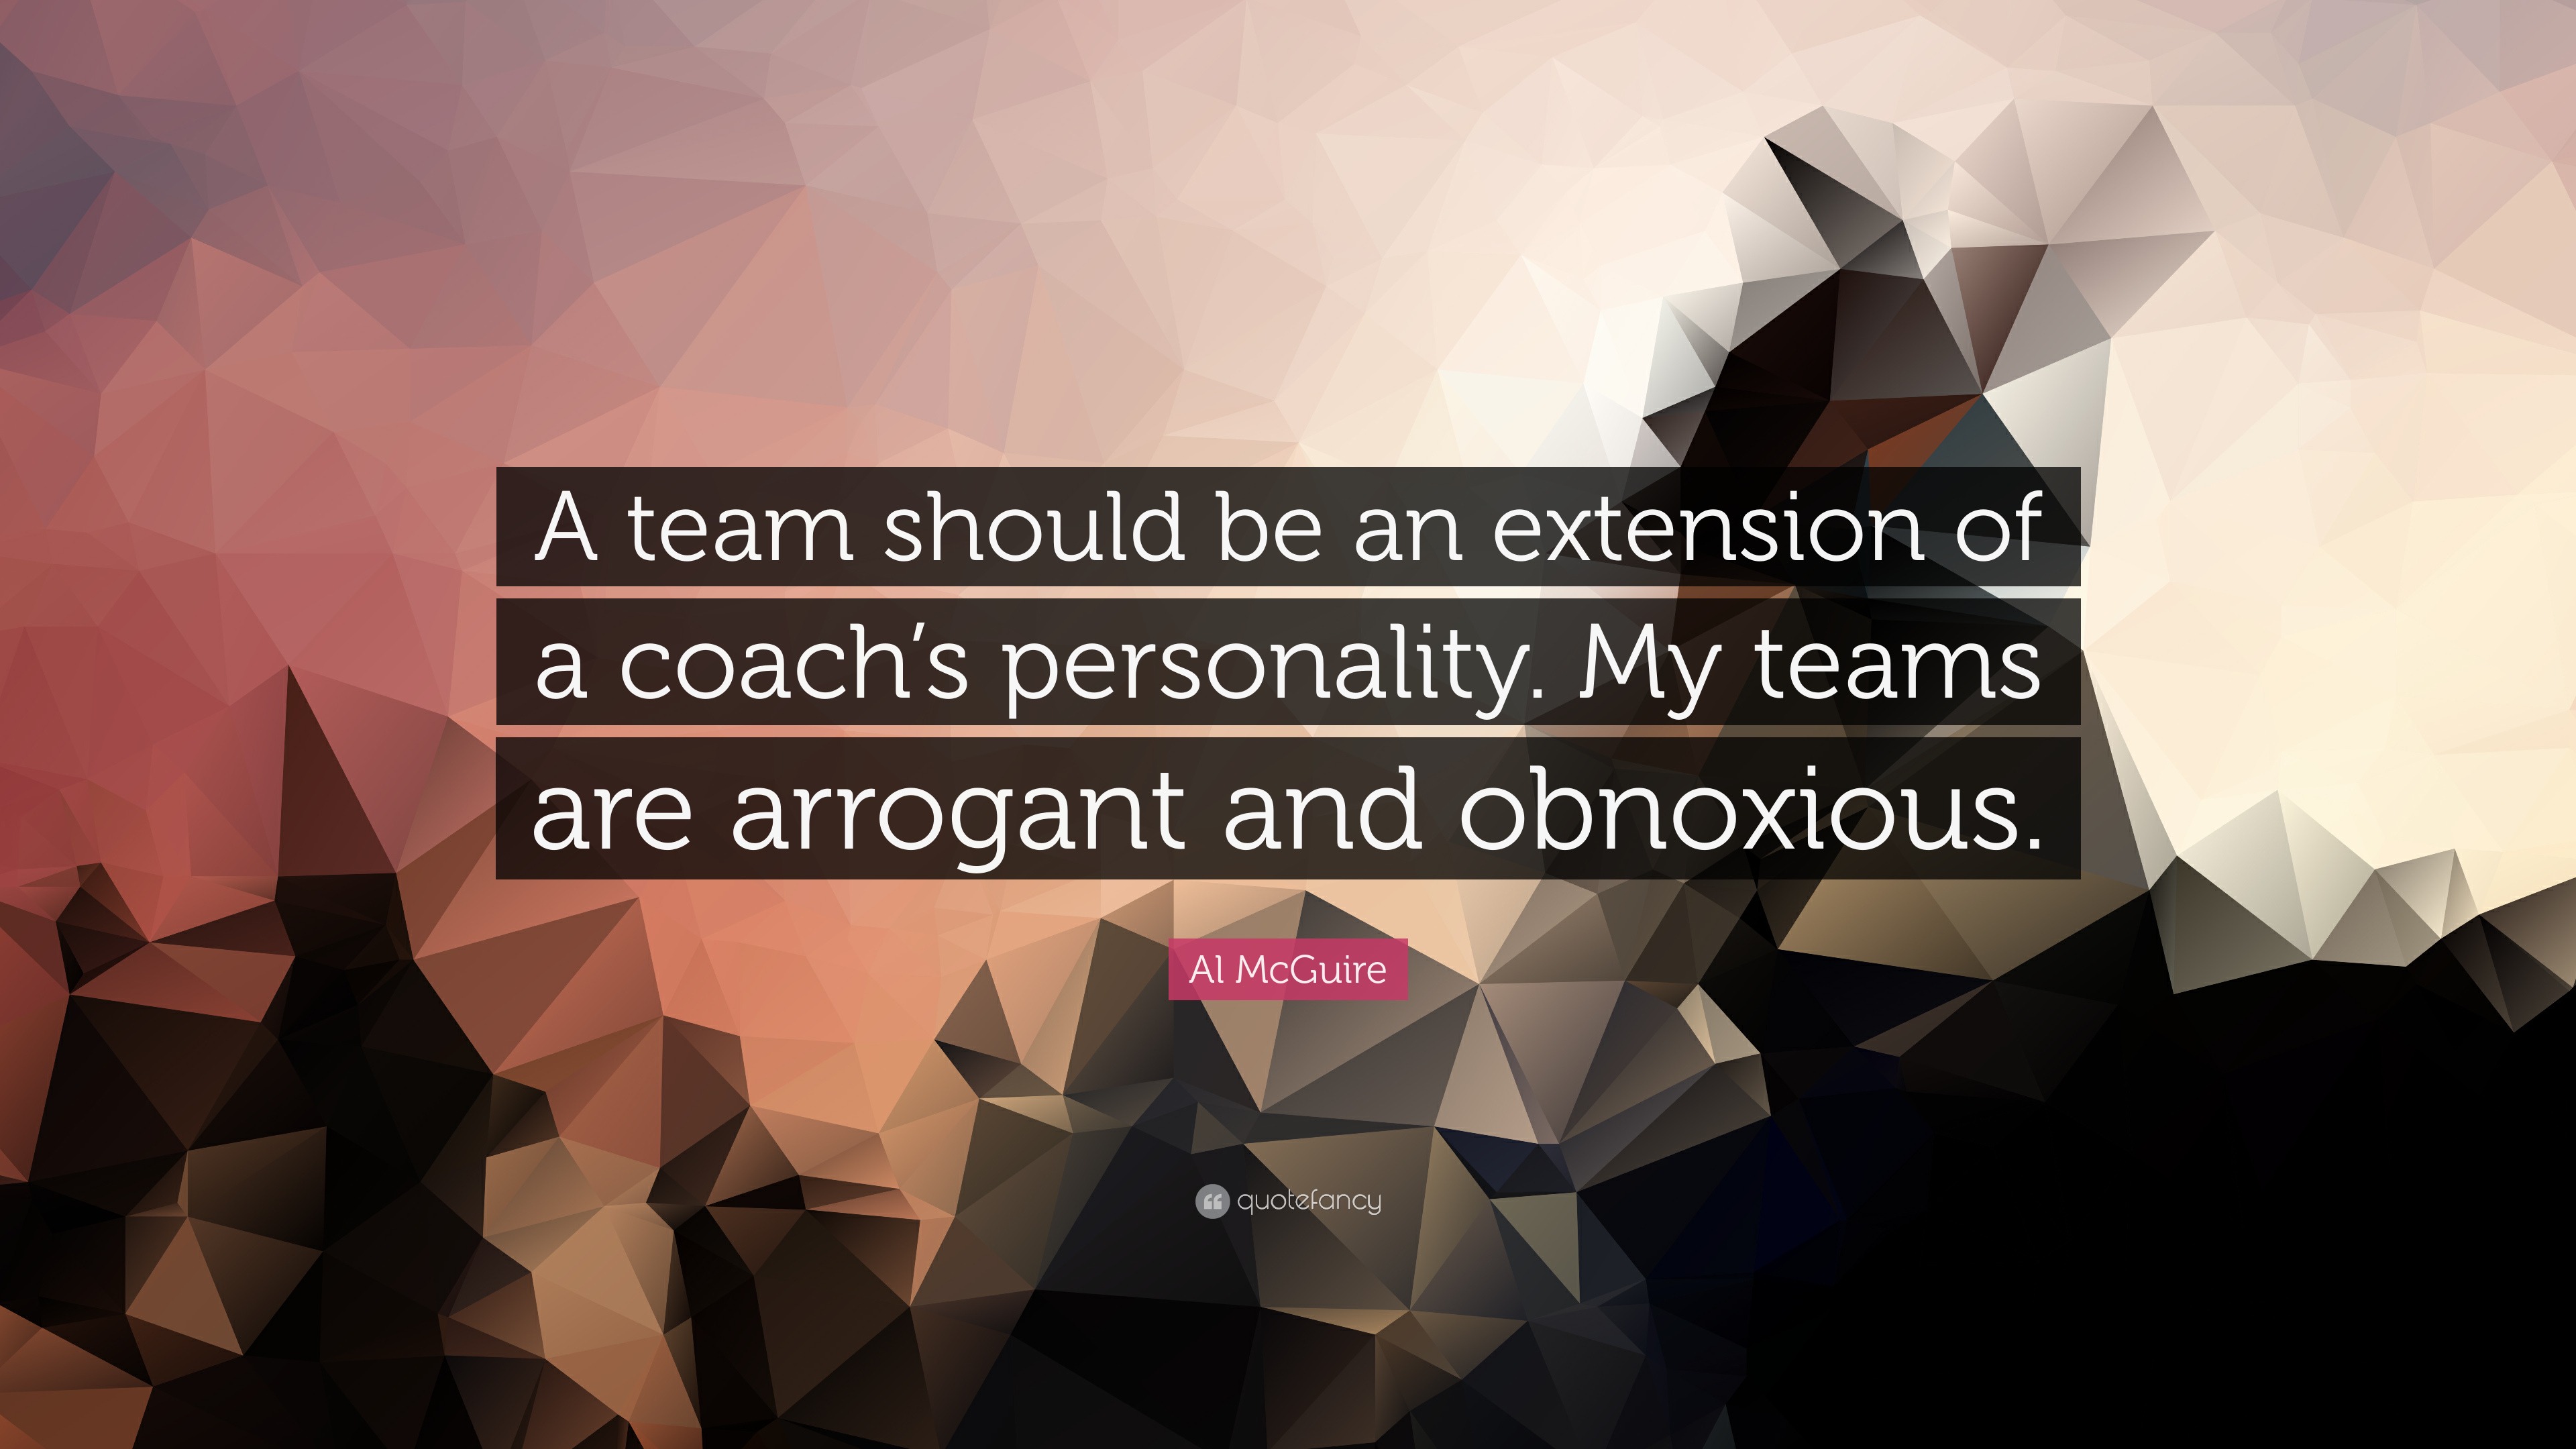 Al McGuire Quote: “A team should be an extension of a coach's personality.  My teams are